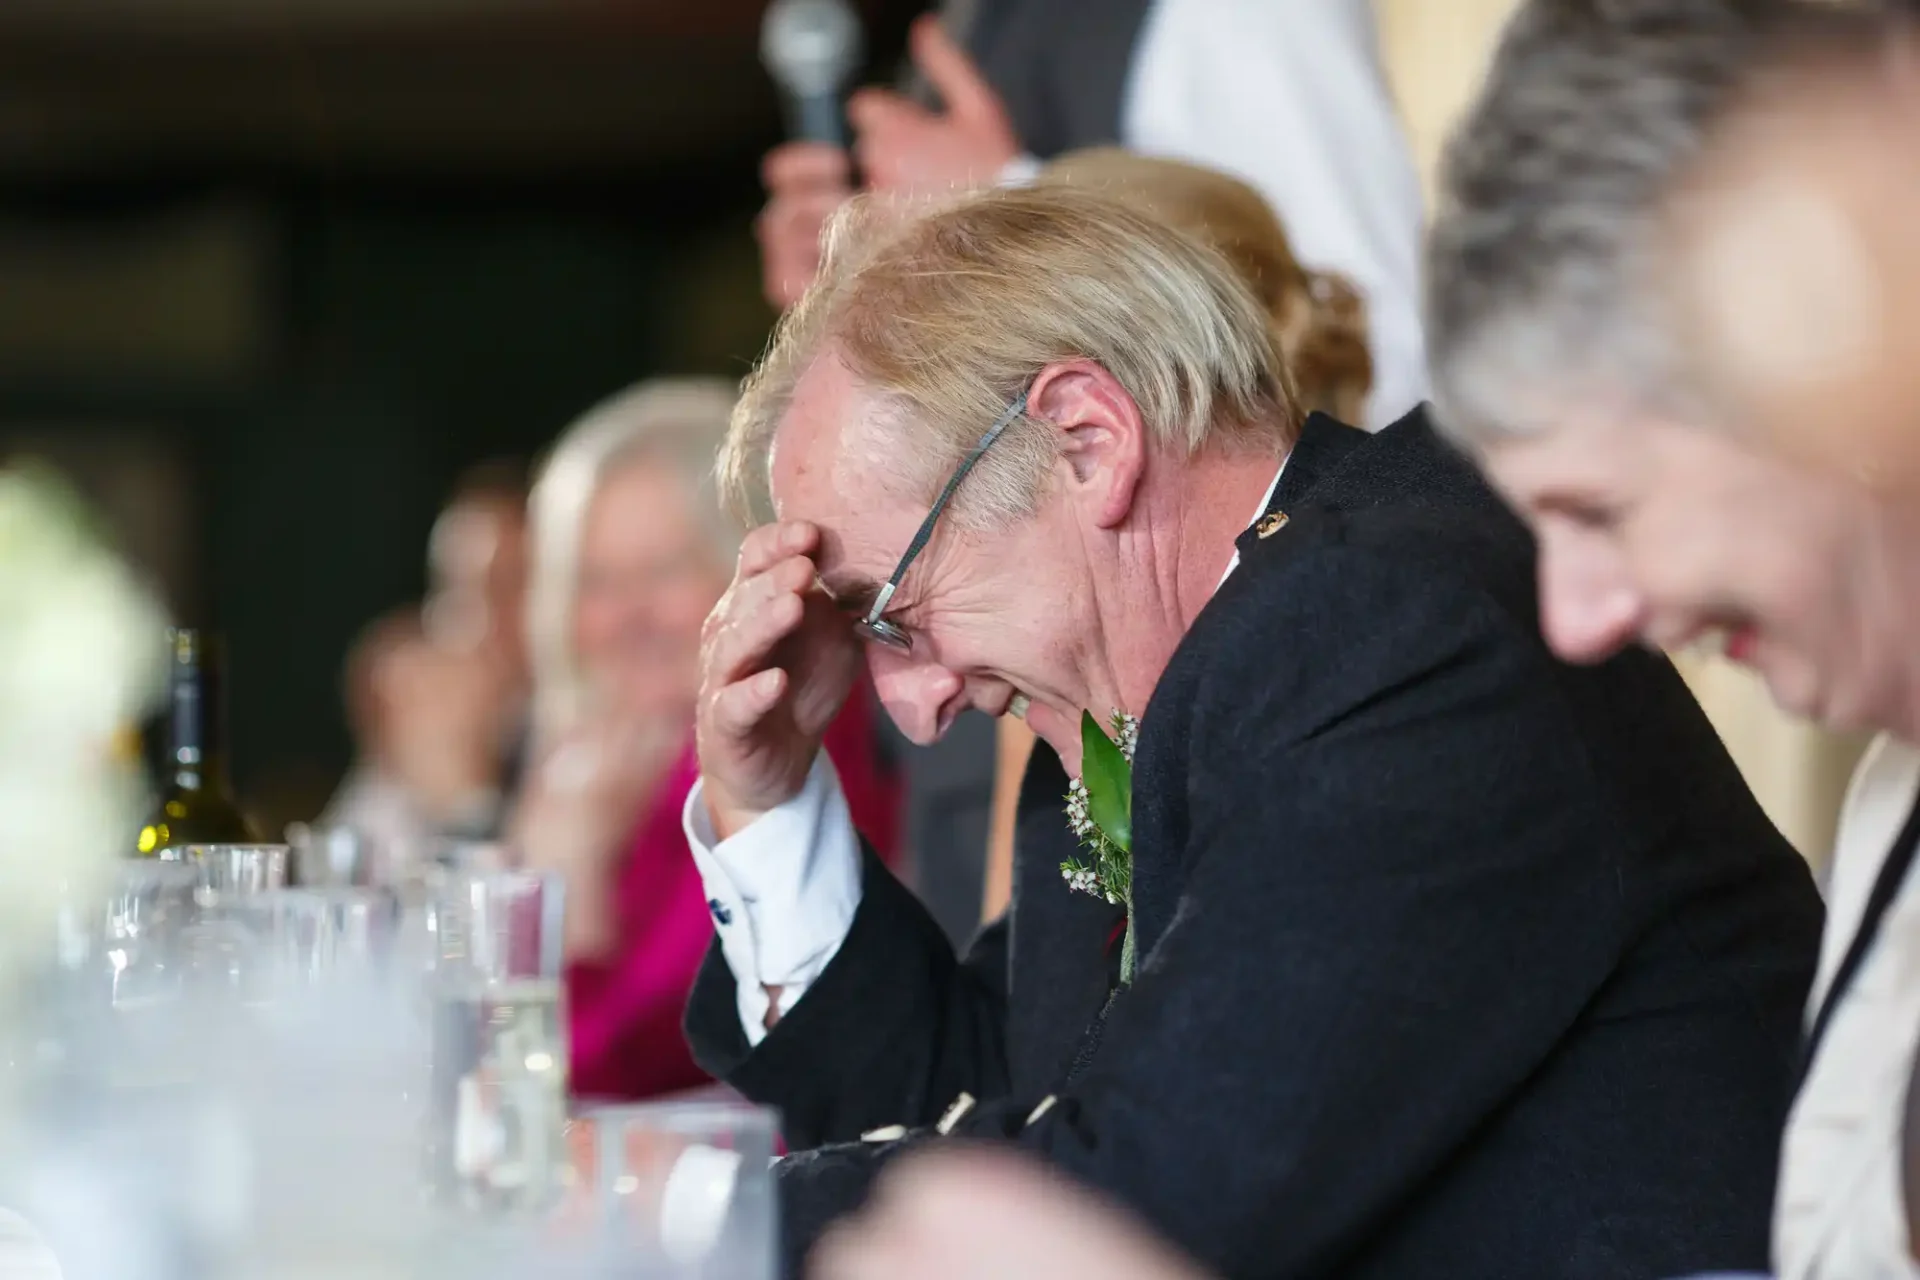 A man laughing heartily, holding his glasses, at a wedding reception table with other joyful guests around him.